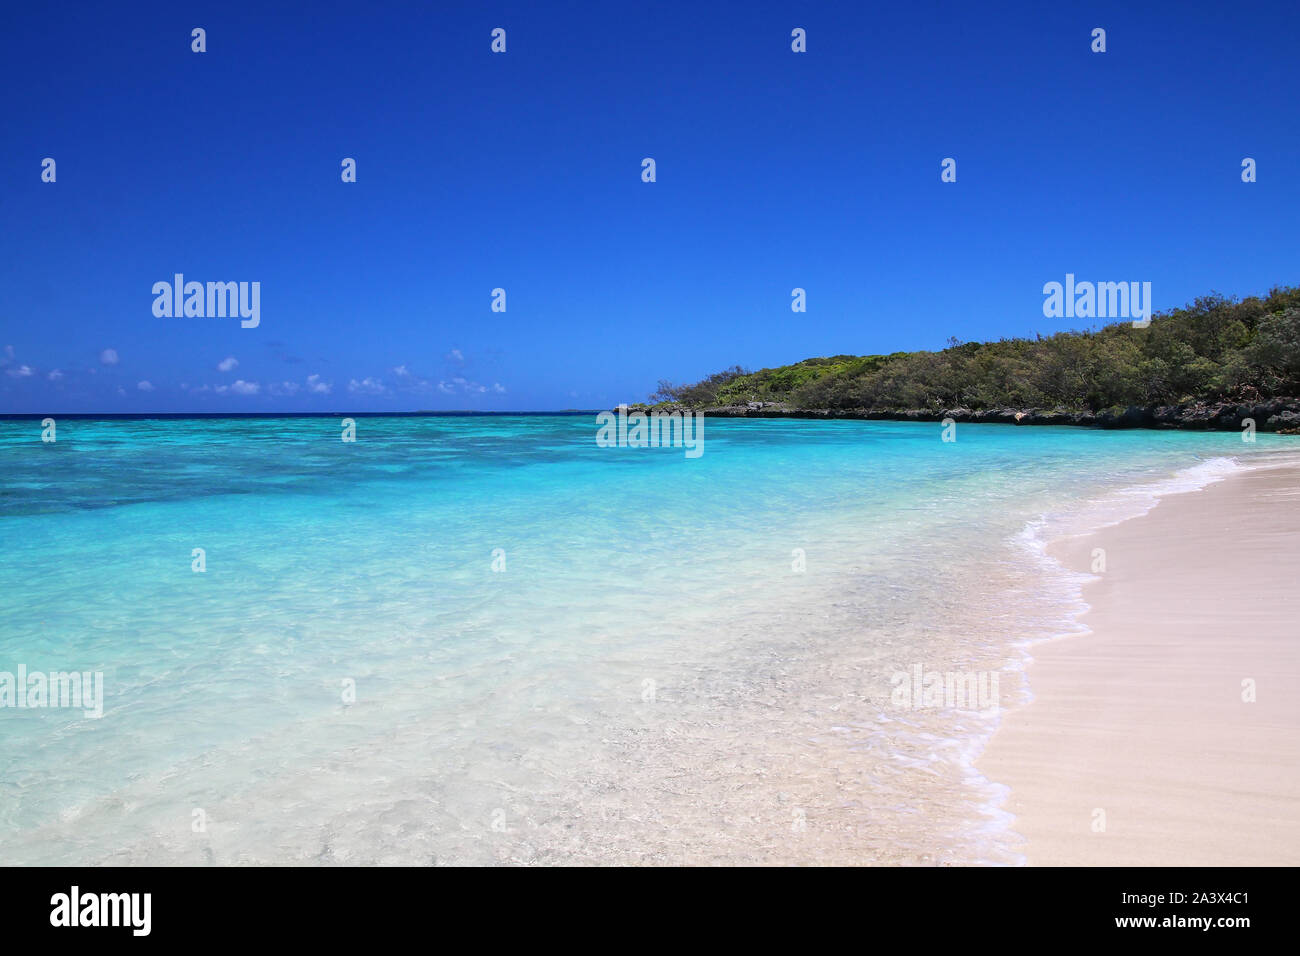 Sandy beach at Gee island in Ouvea lagoon, Loyalty Islands, New Caledonia. The lagoon was listed as Unesco World Heritage site in 2008. Stock Photo